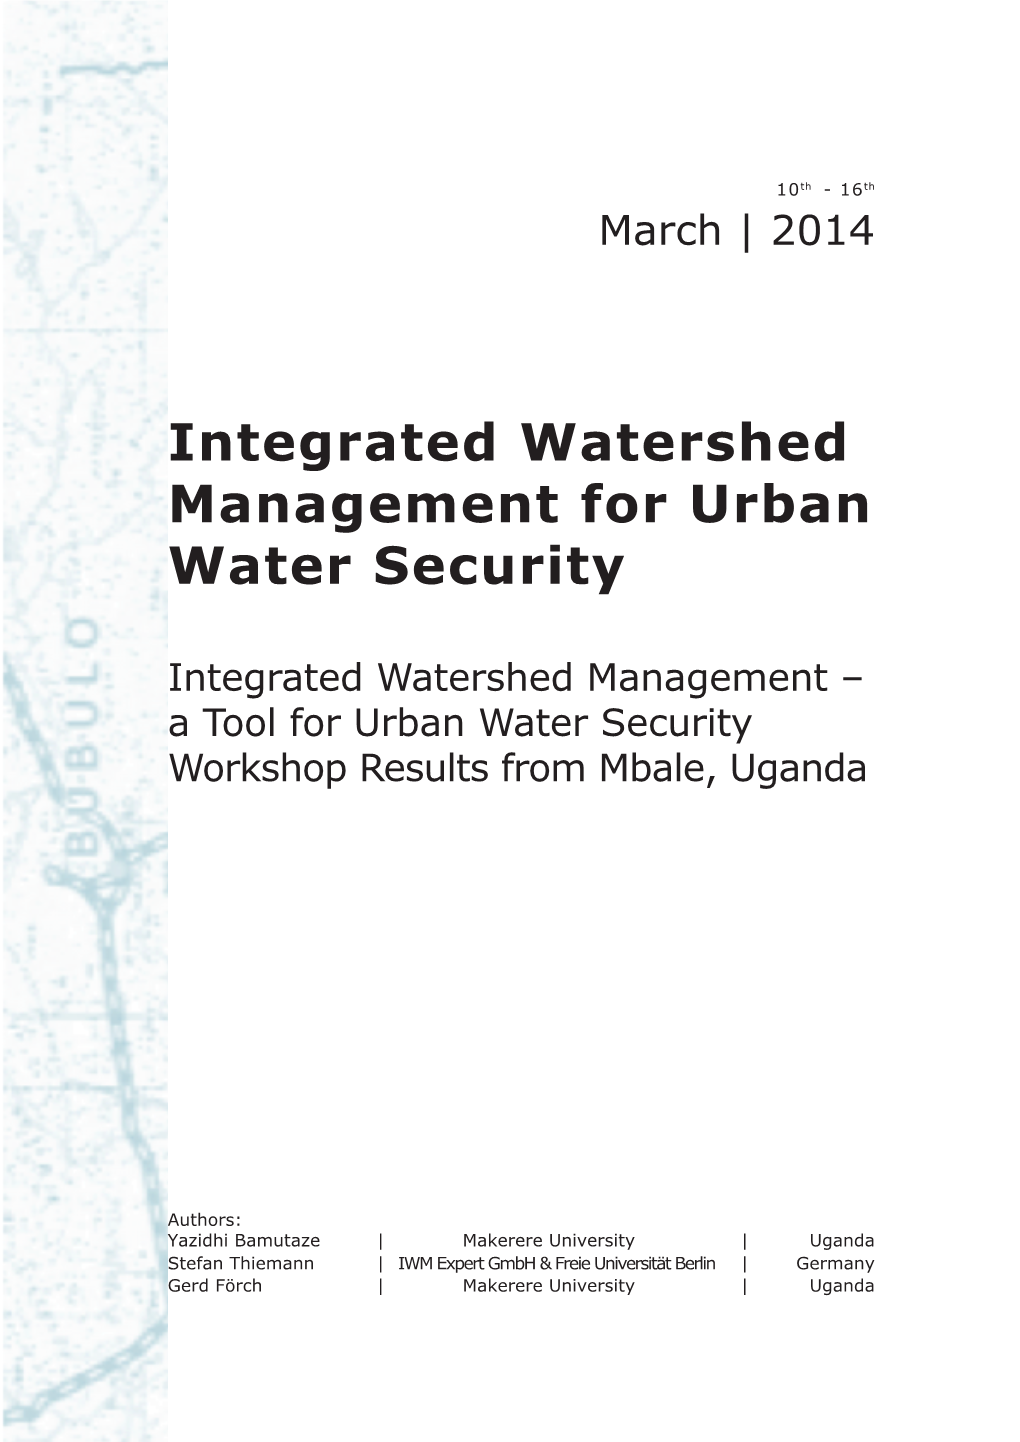 Integrated Watershed Management for Urban Water Security